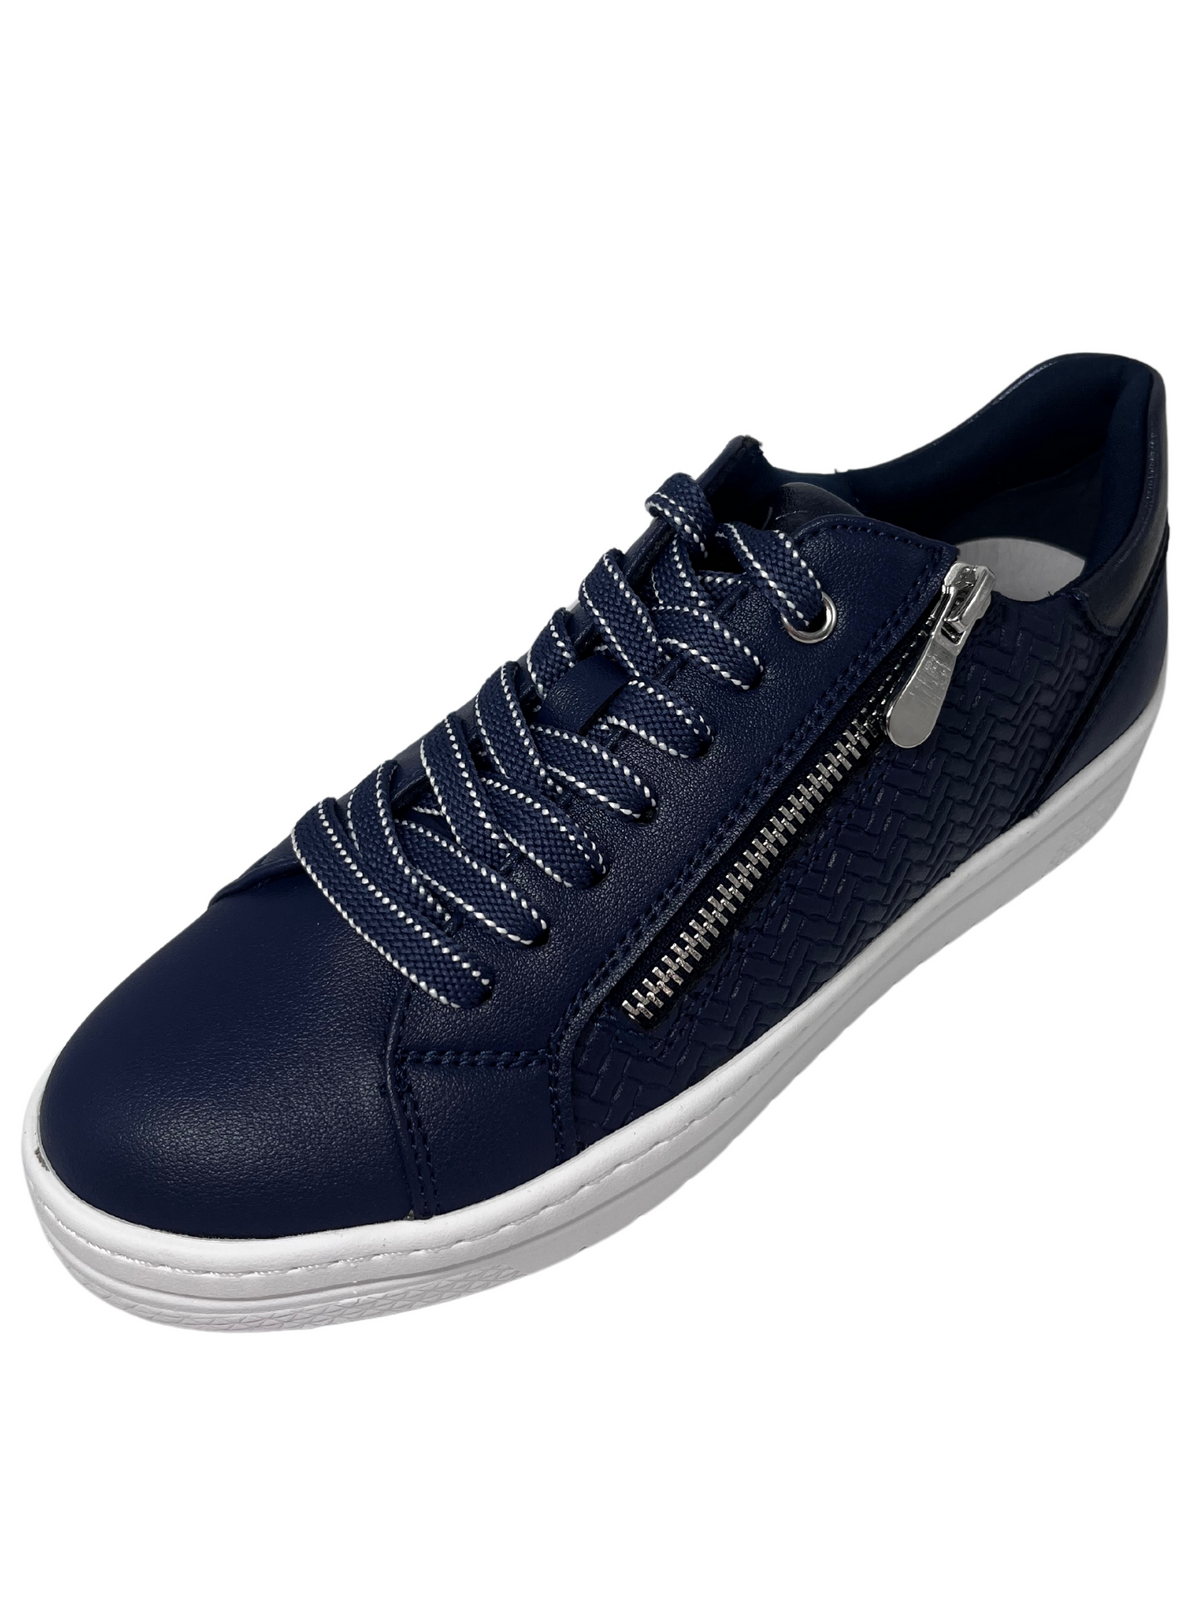 Marco Tozzi Navy Trainer With Woven Design